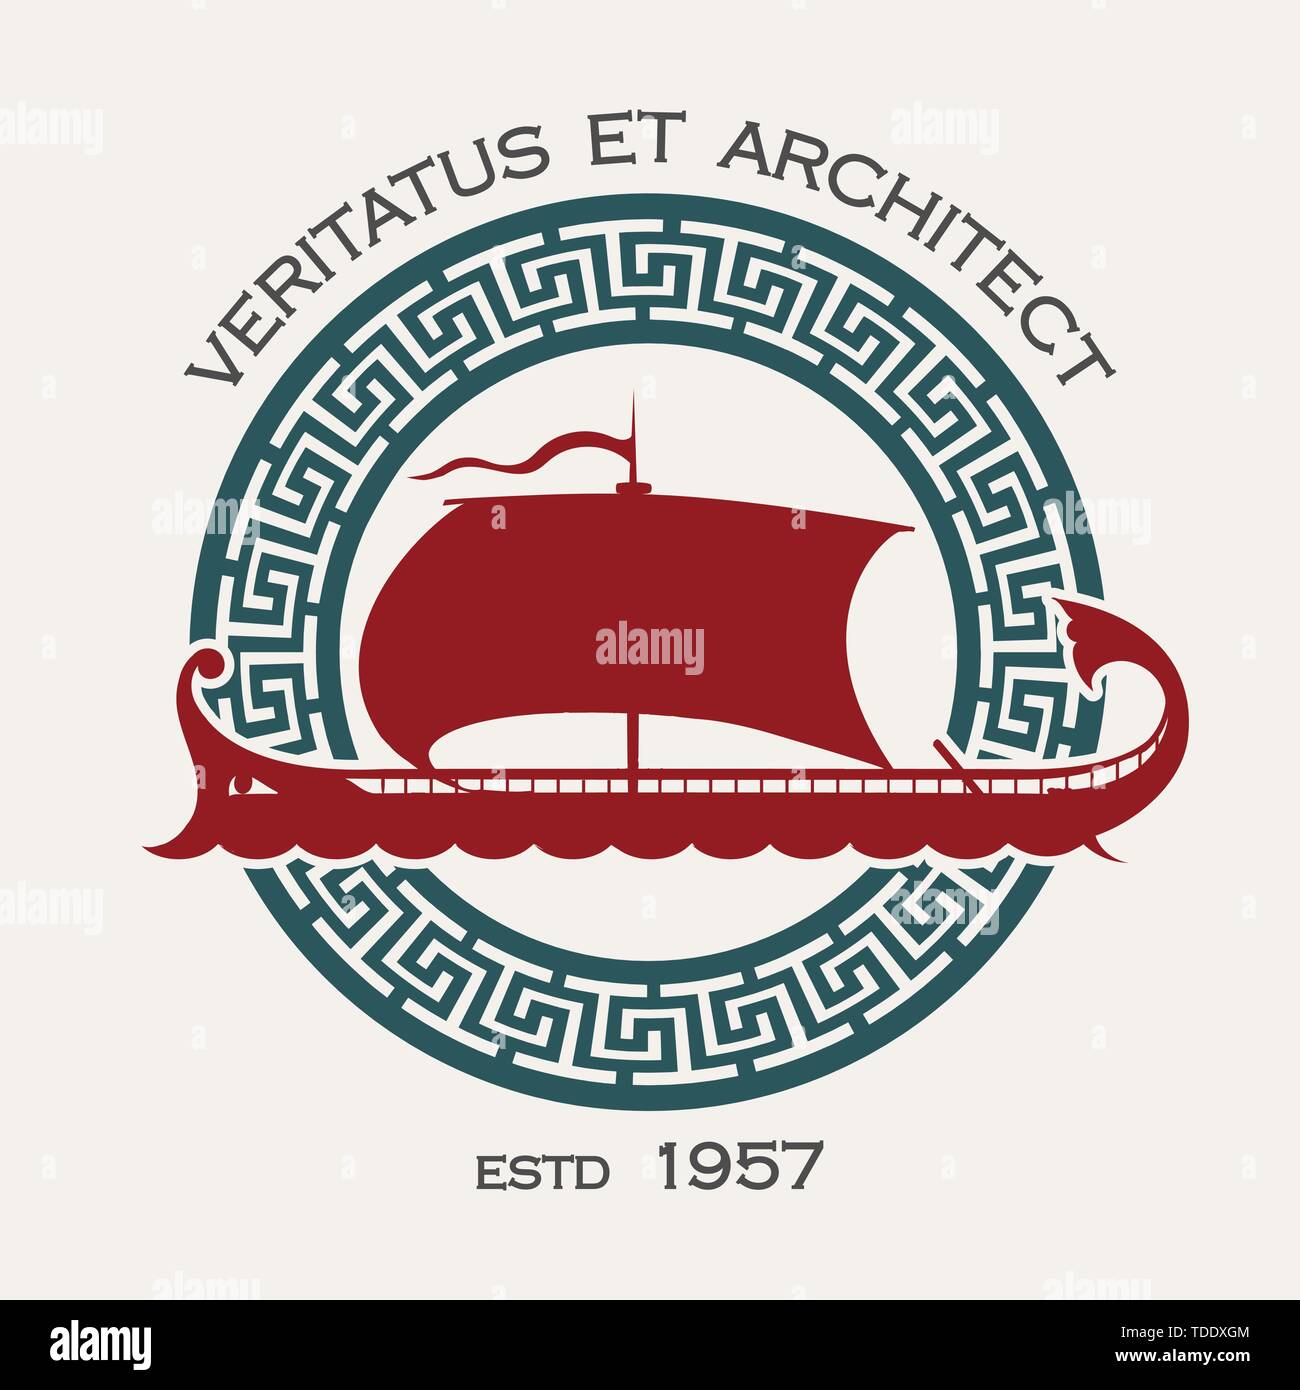 Docking or Shipyard Company Emblem with Ancient Greek ship Galley and meander Circle. Vector Illustration. Stock Vector